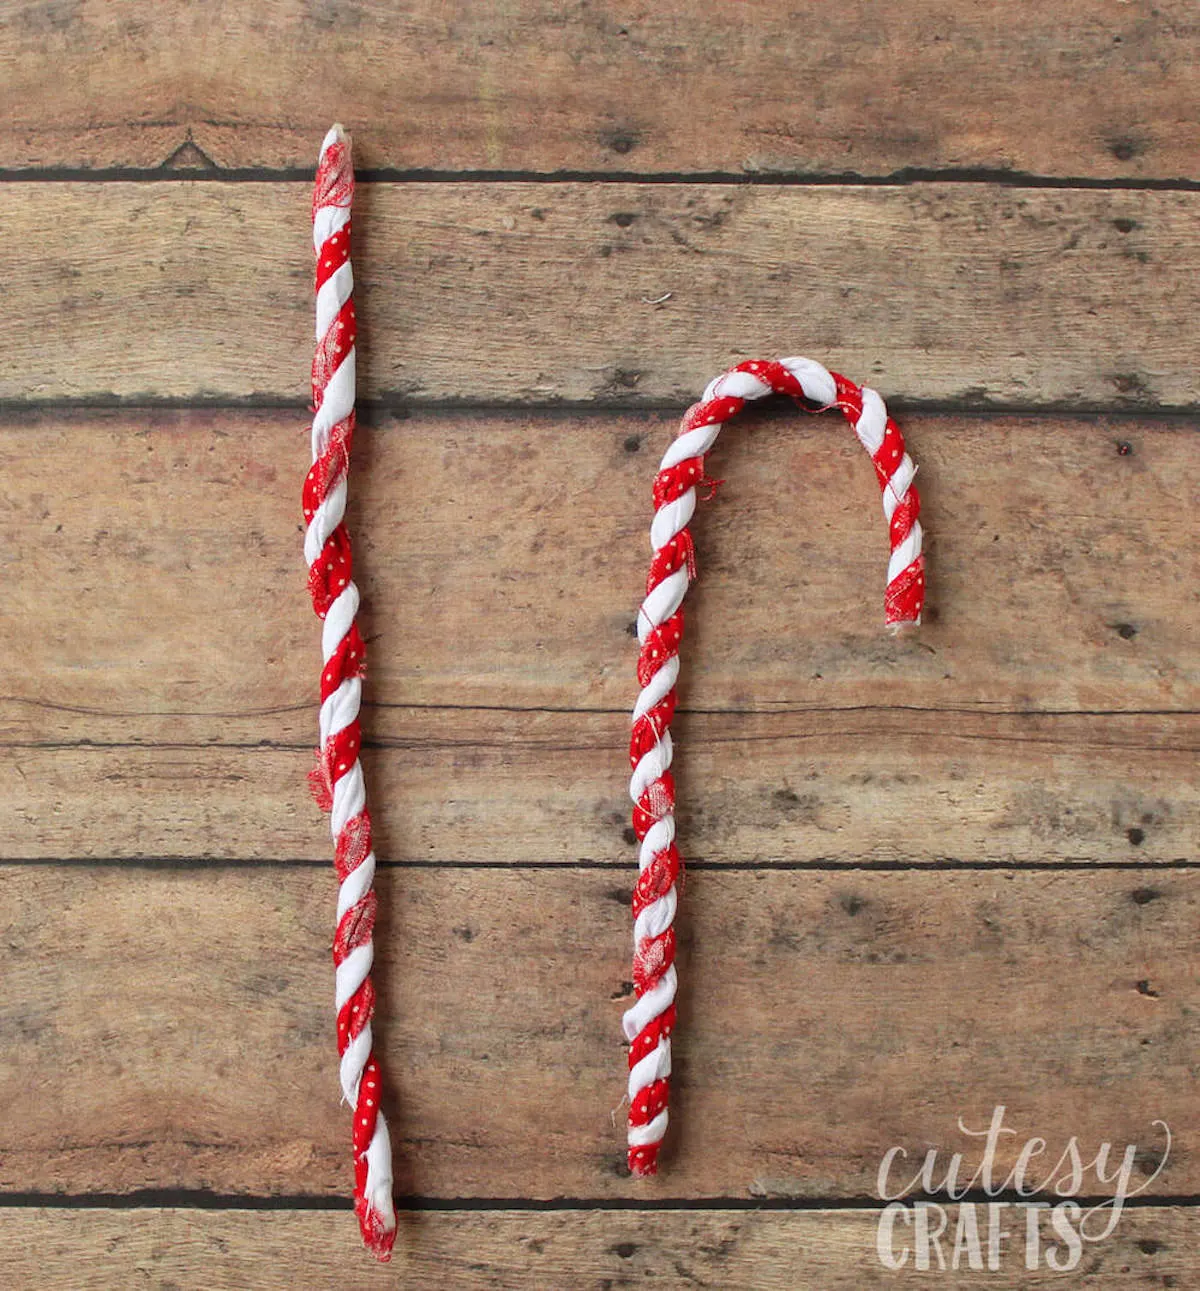 Bending the wire into a candy cane shape